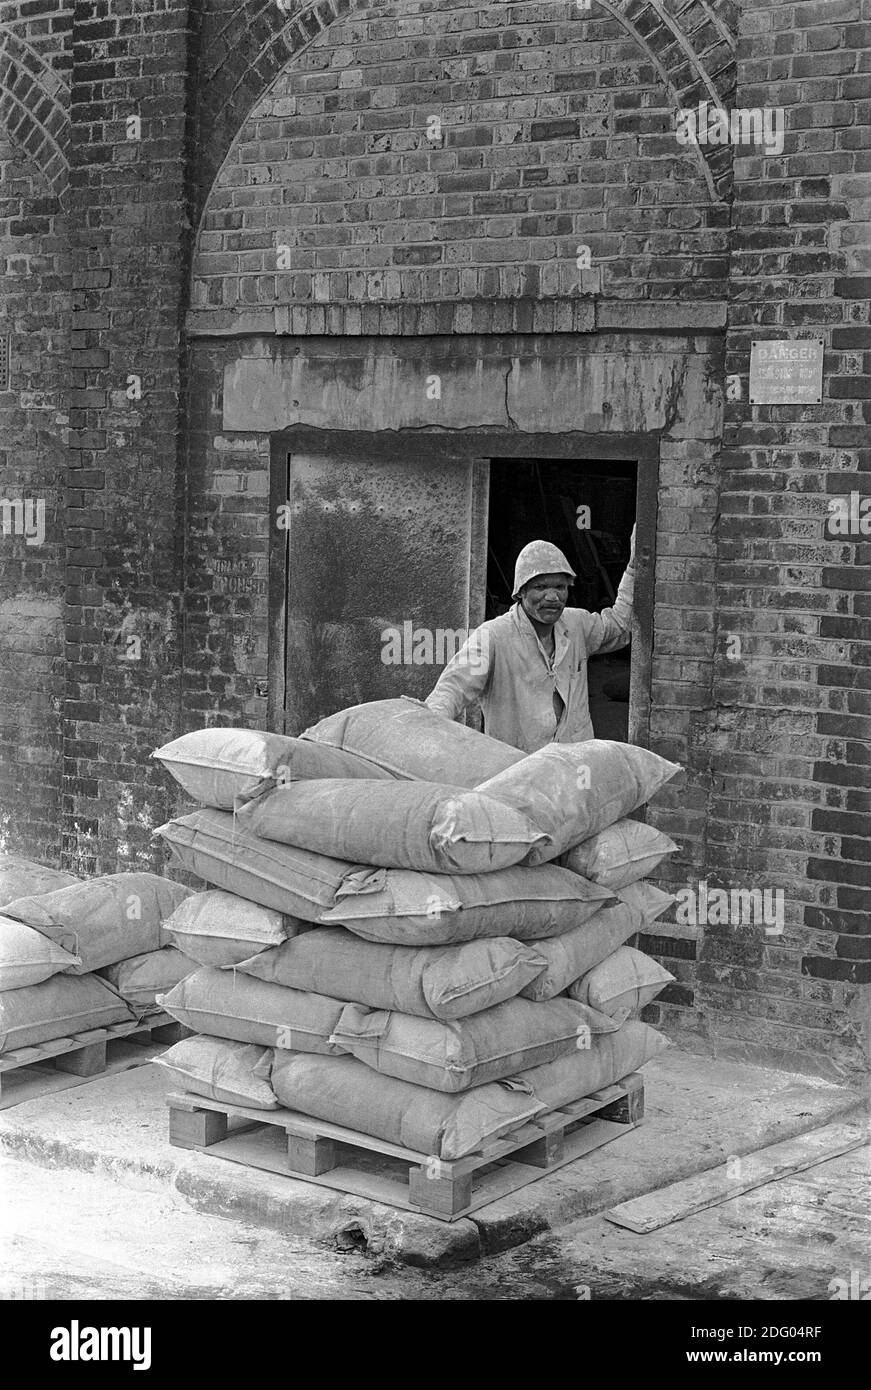 UK, London, Docklands, Isle of Dogs. early 1974. Factory near to Coldharbour. Partex Parting Powder manufacture, Foundrimet, Foundry & Metallurgical. The bags of powder are stacked, by this worker, ready for delivery. Exported to Sweden. the workers were given 3 pints of milk a day because of the dust, £10 Xmas bonus and drinks in The Gun, a nearby pub. Stock Photo